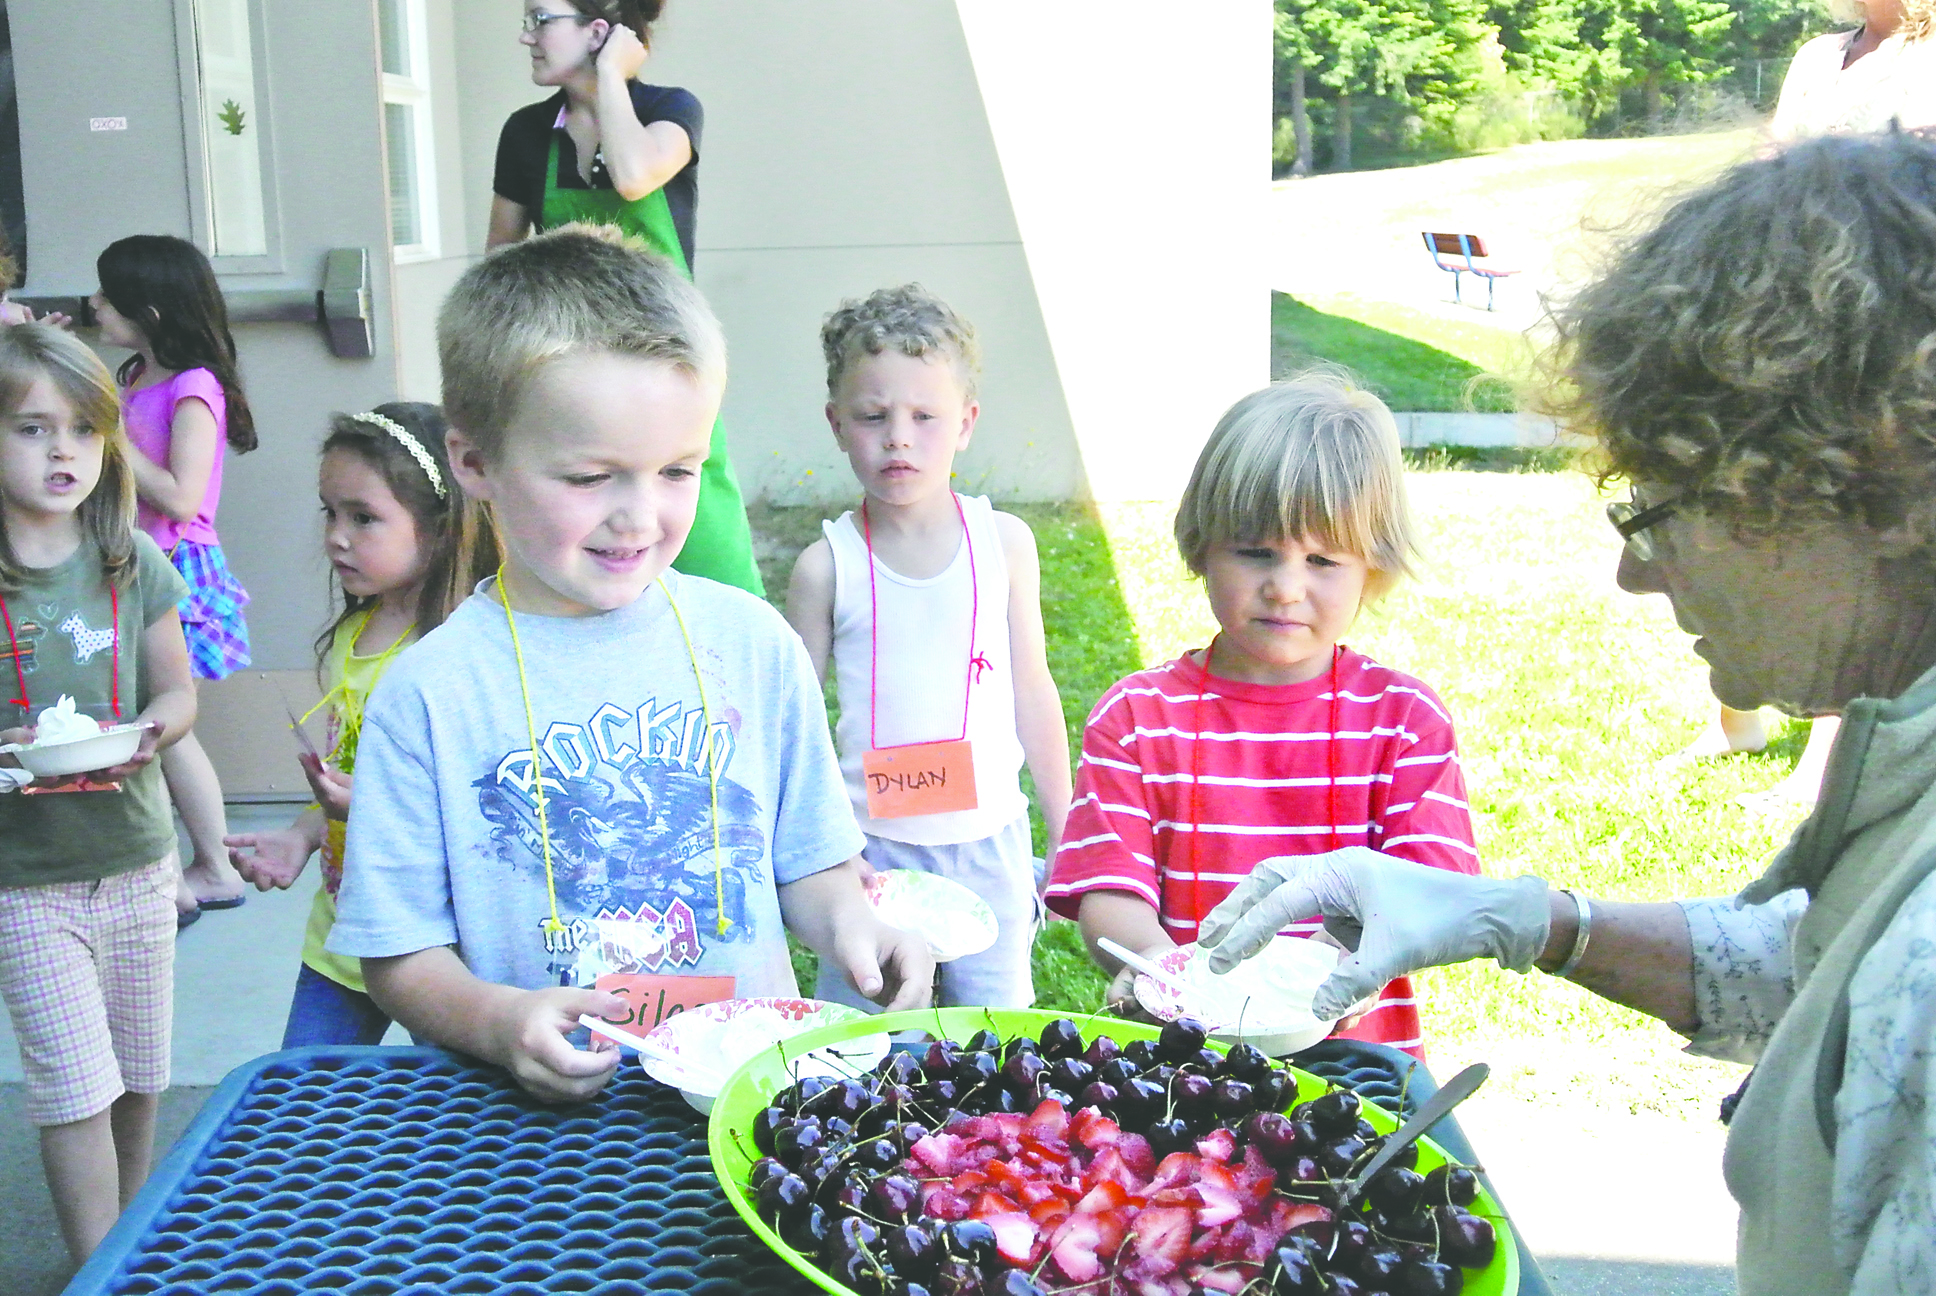 Volunteer Eliana Rose dishes out cherries and strawberries at an ice-cream social at Chimacum Creek Primary School on Wednesday. Kids taking part in the event include Silas Cotton